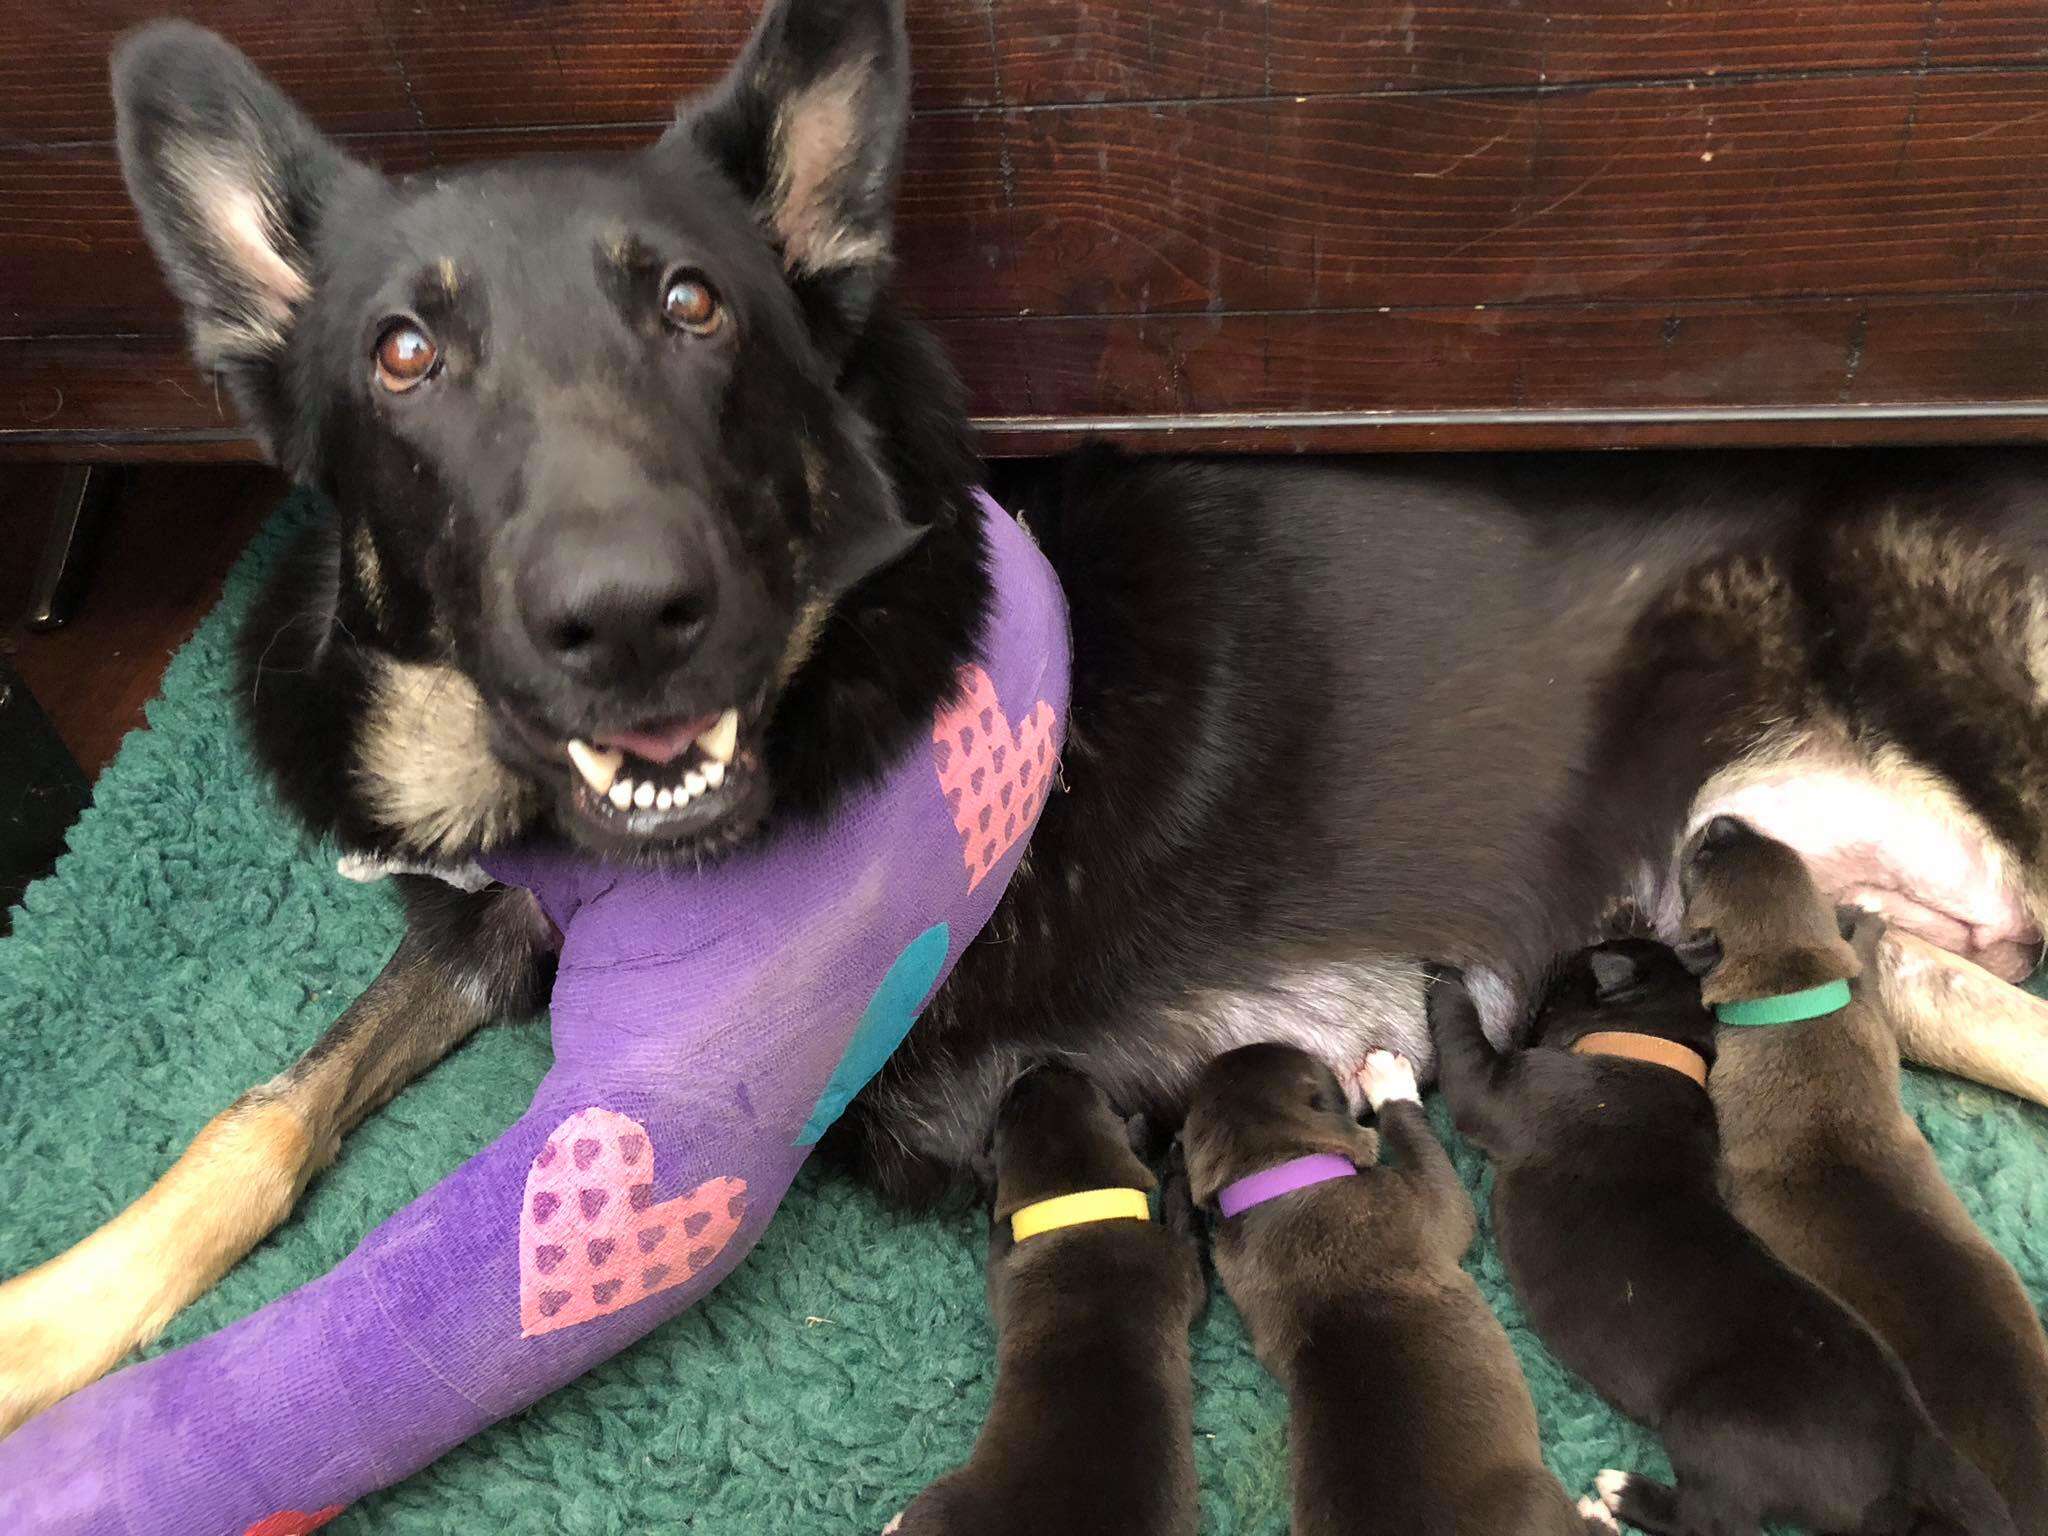 Marley the German shepherd and her puppies